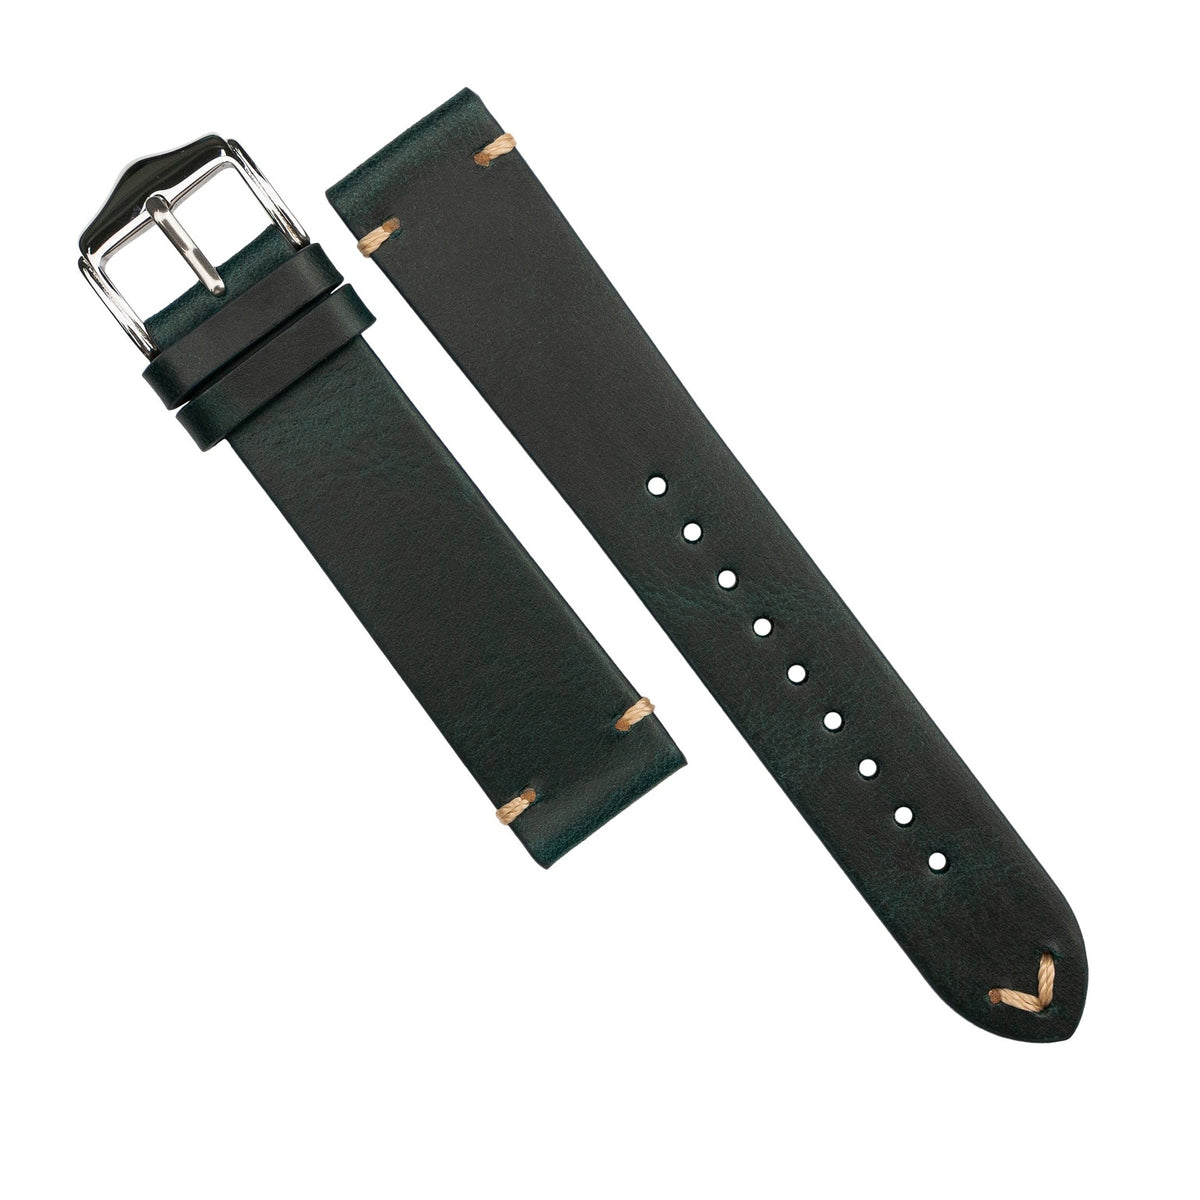 Premium Vintage Oil Waxed Leather Watch Strap in Navy (18mm) - Nomad Watch Works SG